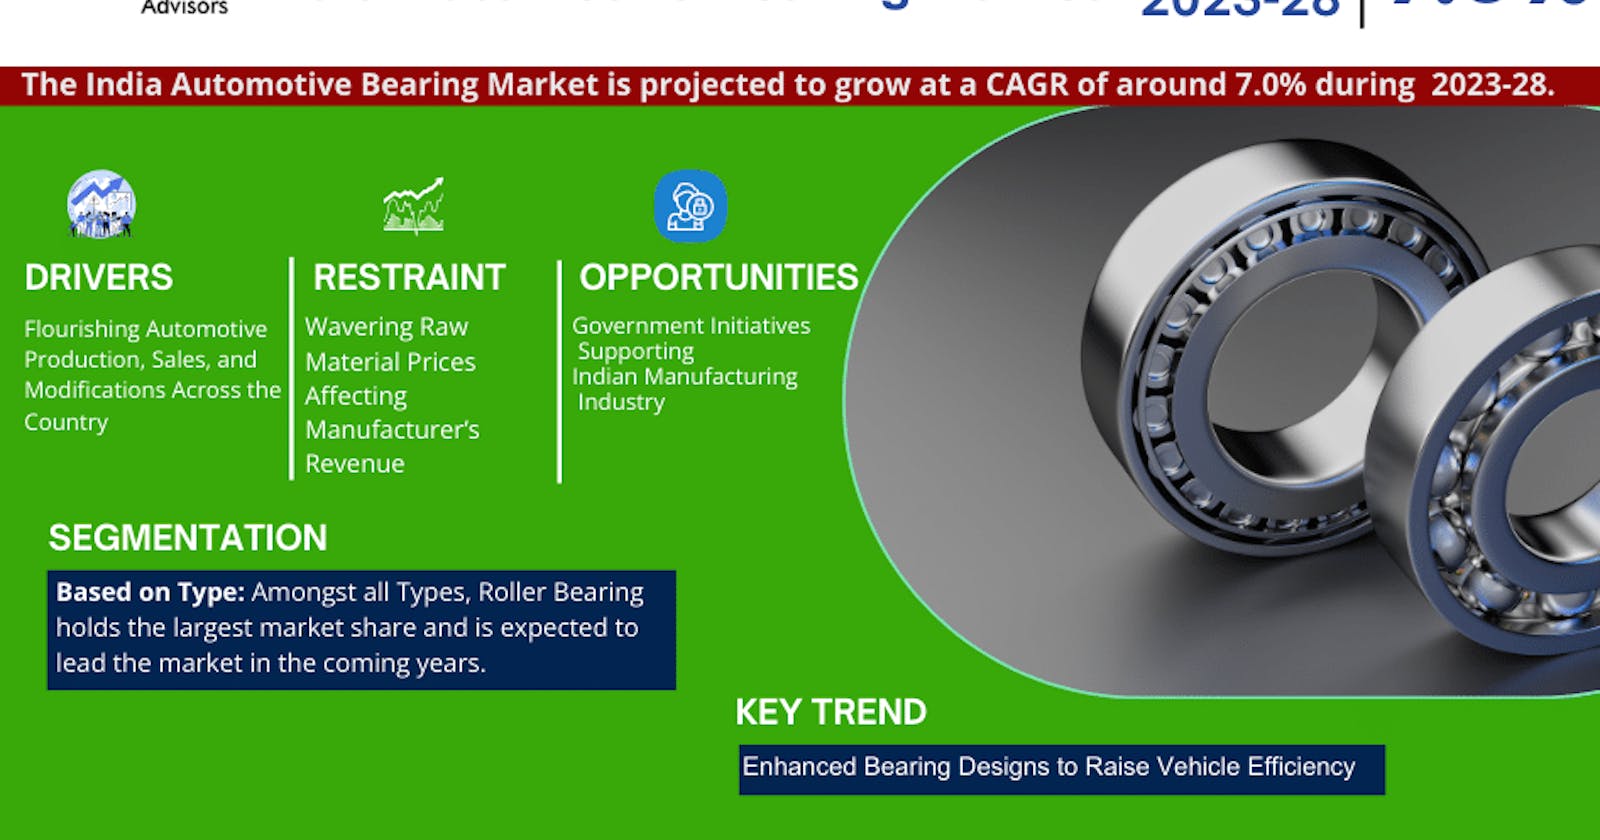 India Automotive Bearing Market Trends: Analysis of 7.0% CAGR Growth (2023-28)